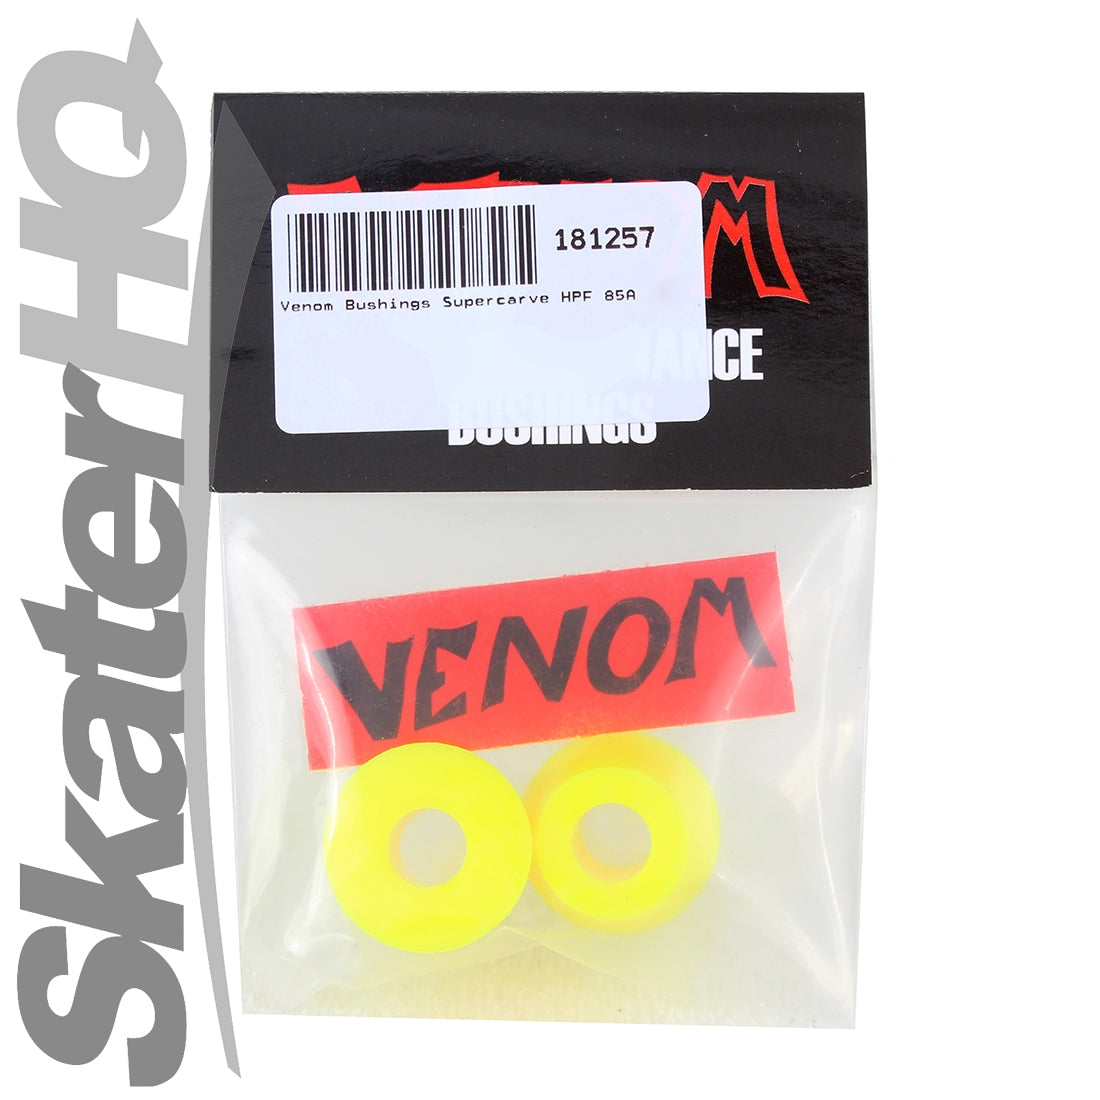 Venom Bushings Supercarve HPF 85A - Neon Yellow Skateboard Hardware and Parts